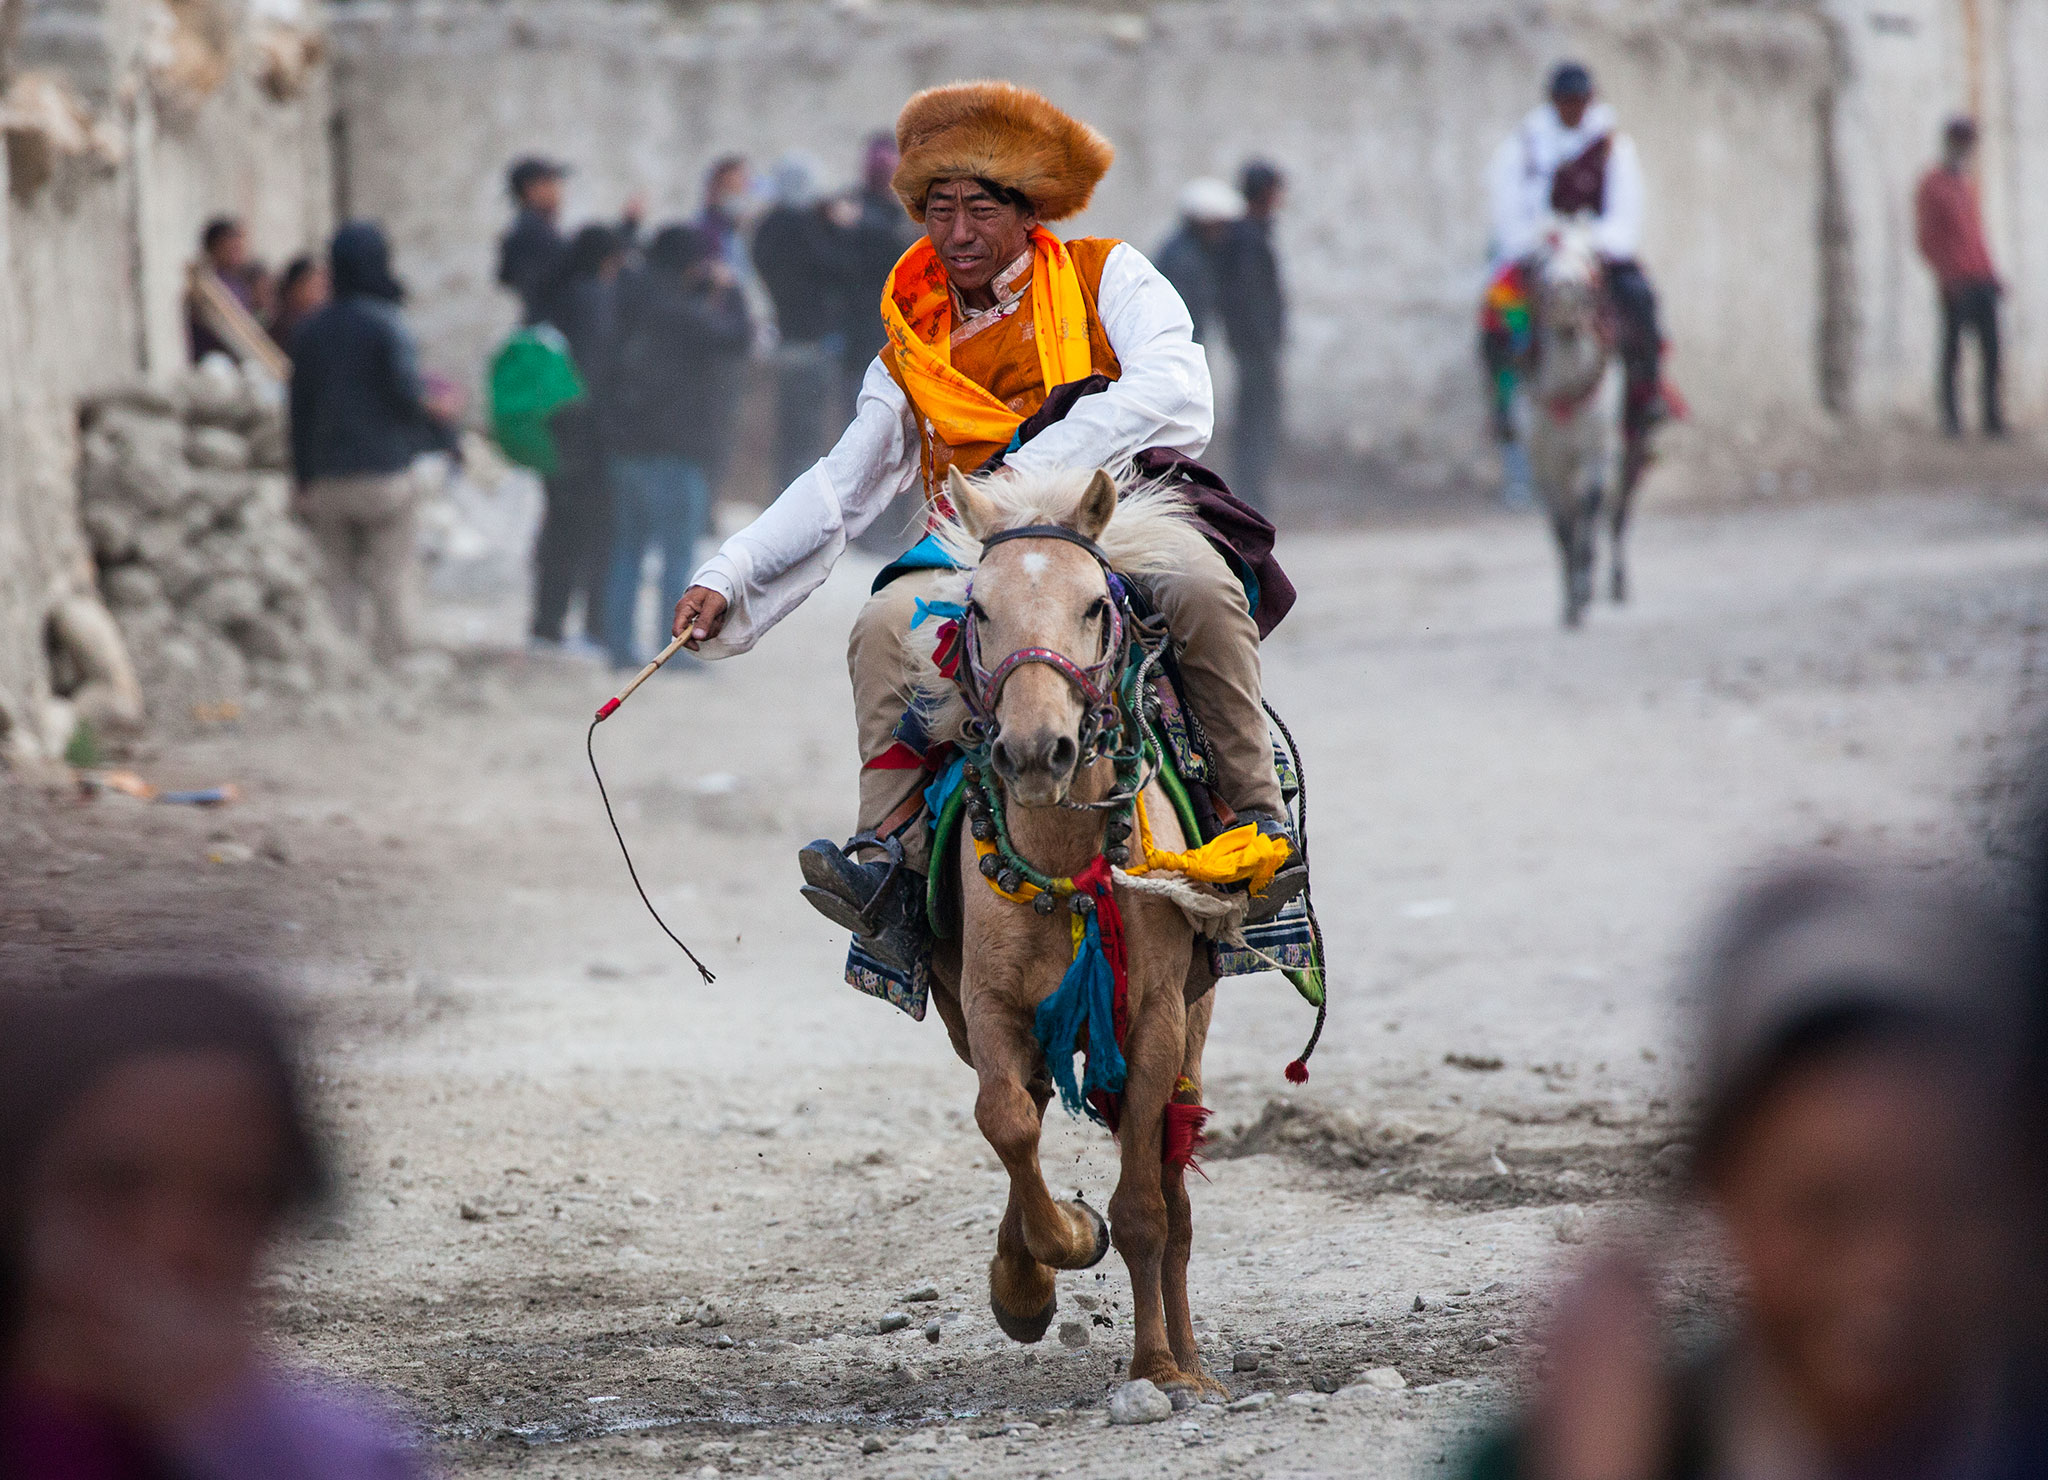 Mustang’s Yartung festival kicks off after two years